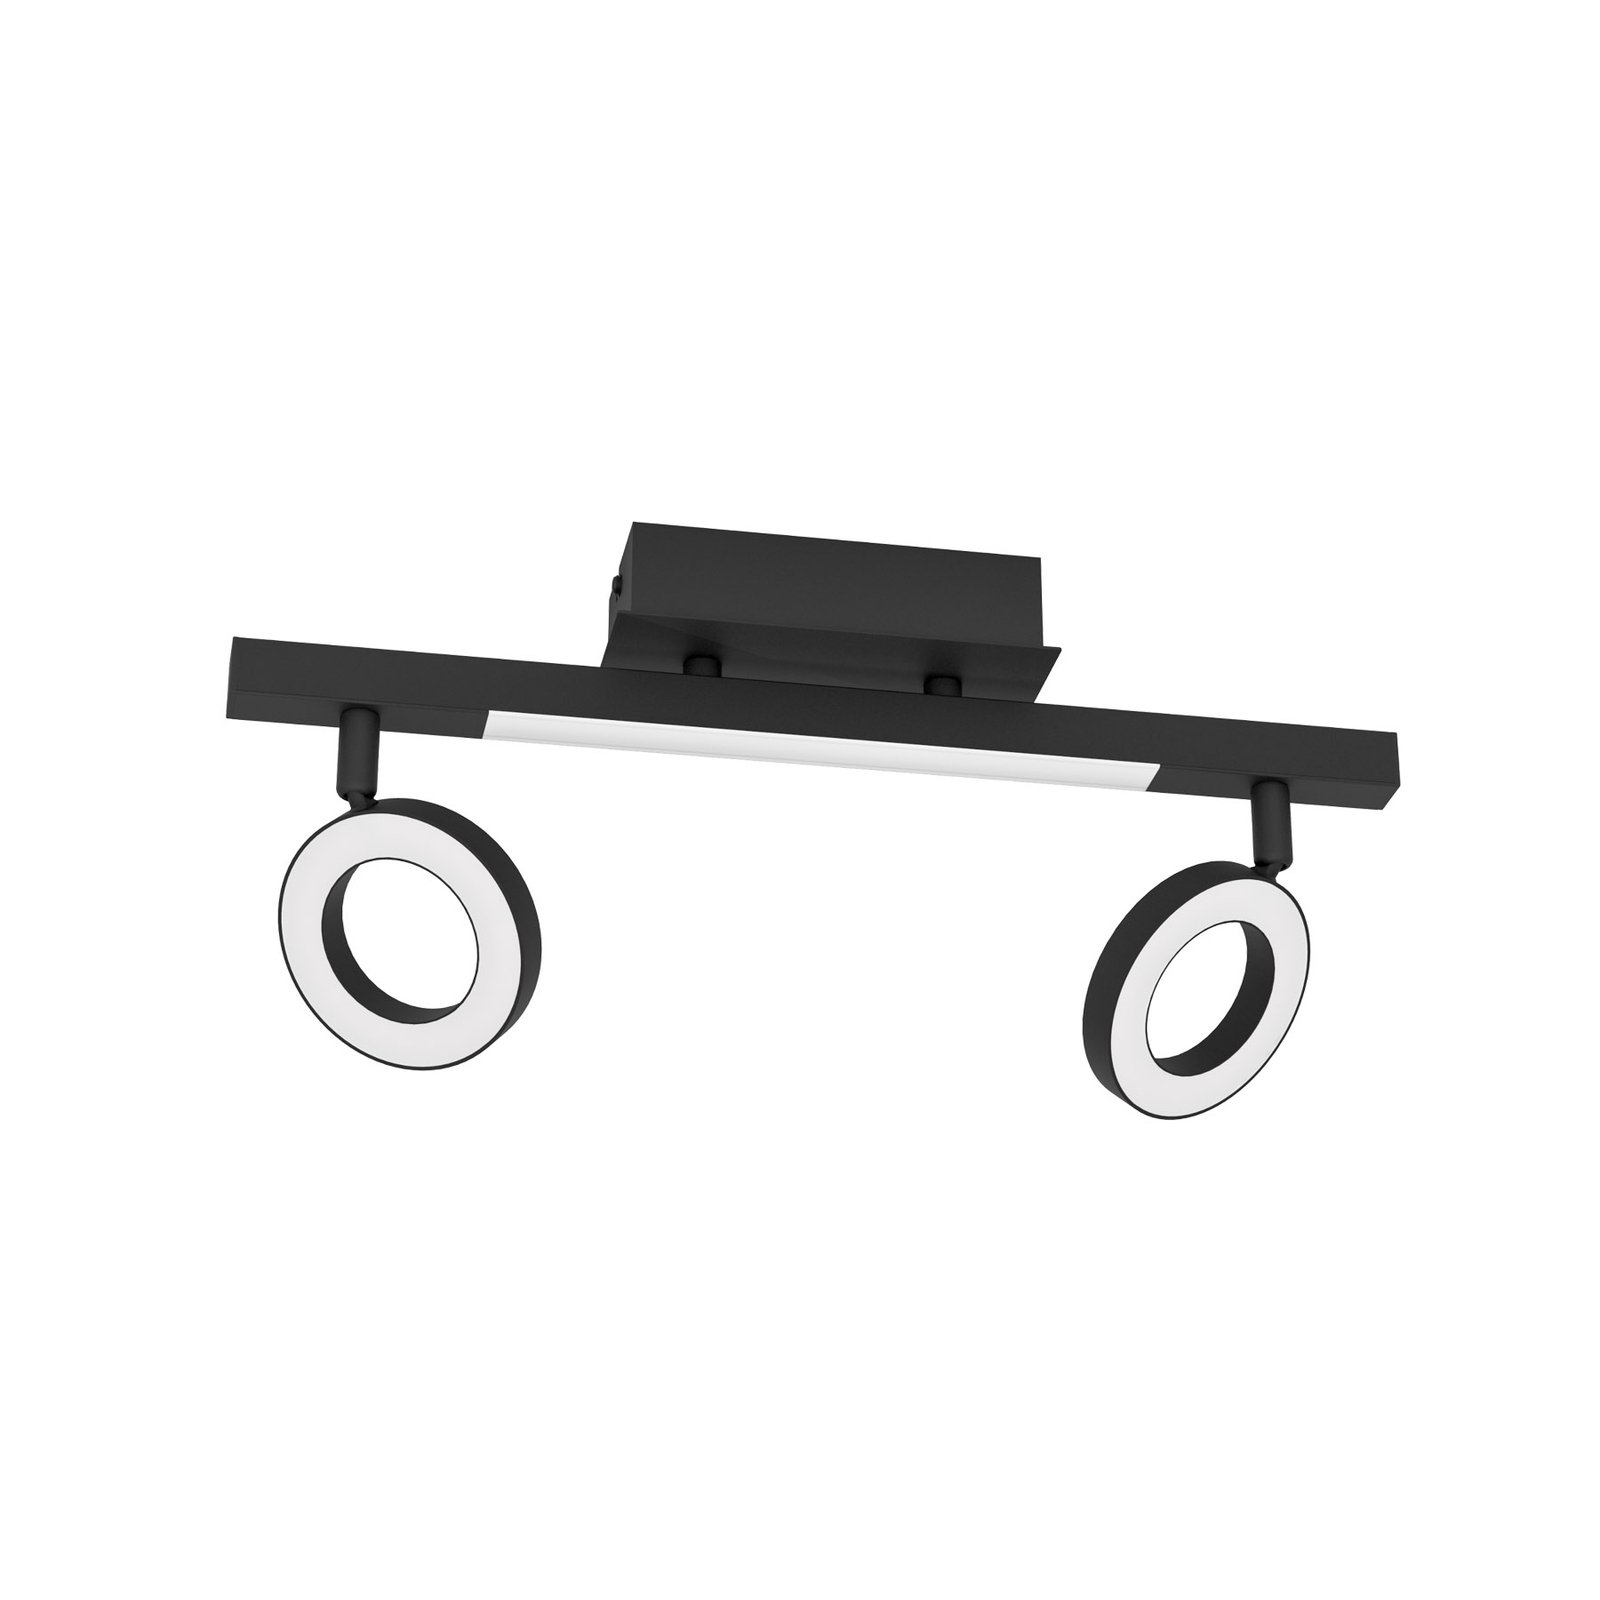 Cardillio 2 LED downlight black with two rings